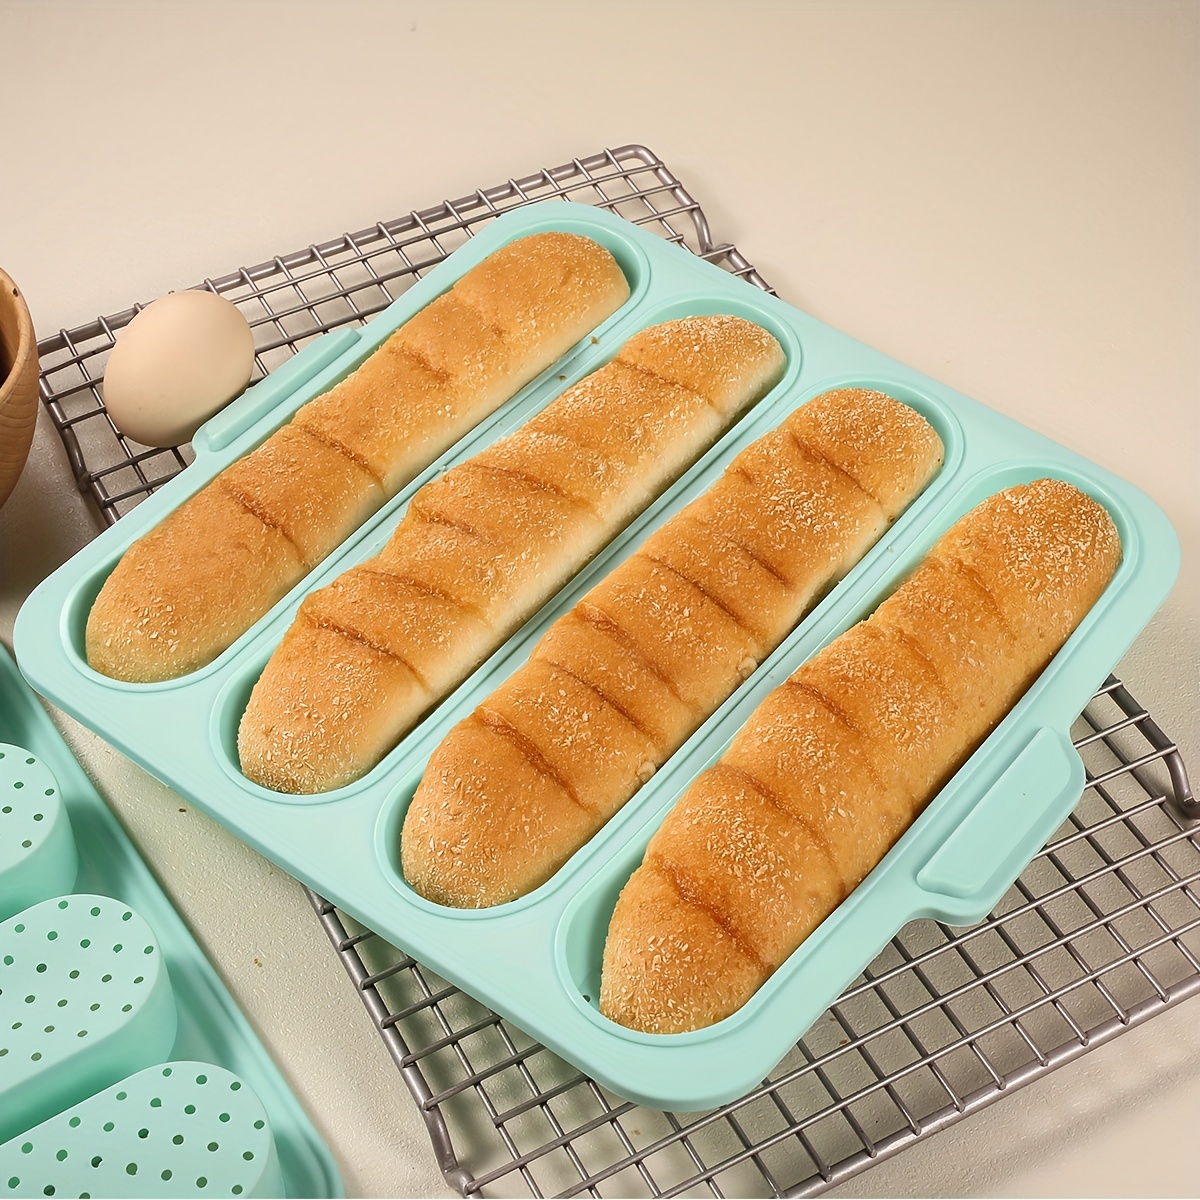  Silicone Loaf Pan, Nonstick Heat Proof Cloche Bread Baker Bread  Bowl Loaf Pan for Oven Baking: Home & Kitchen